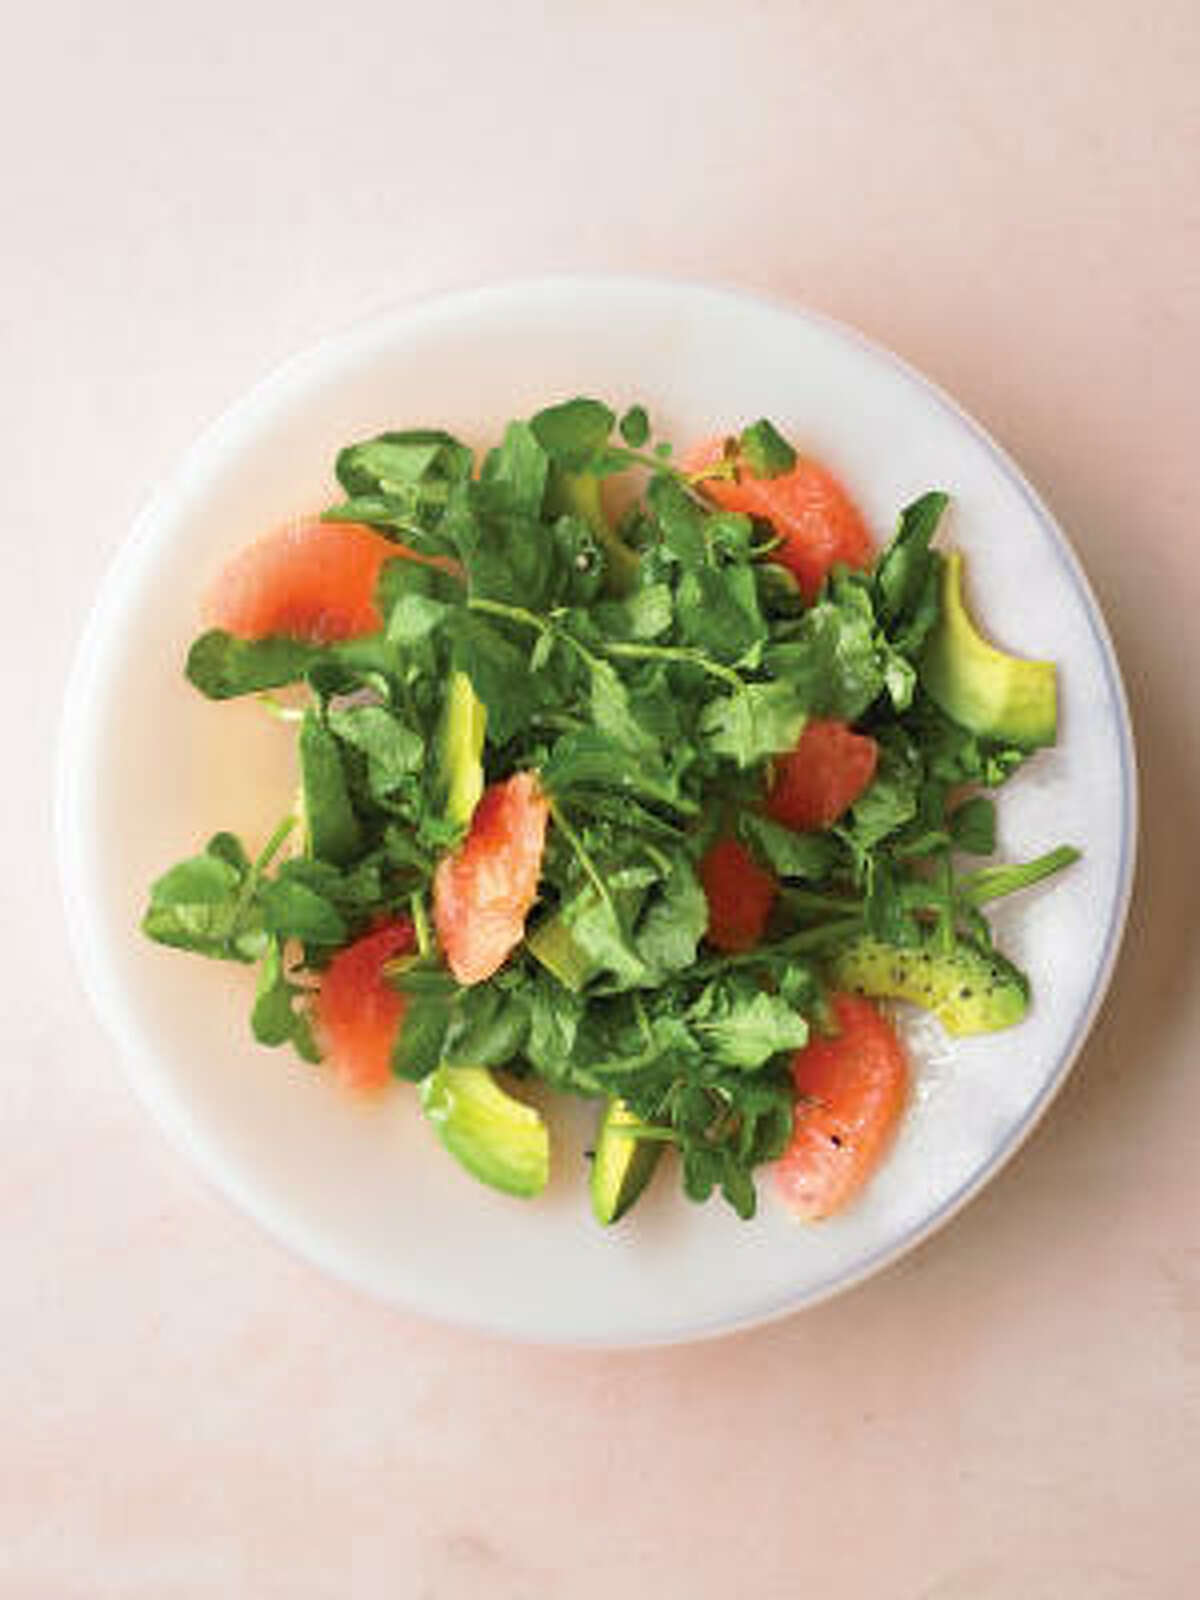 Vitamin C and antioxidants in grapefruit make this Grapefruit and Watercress Salad a healthy choice.